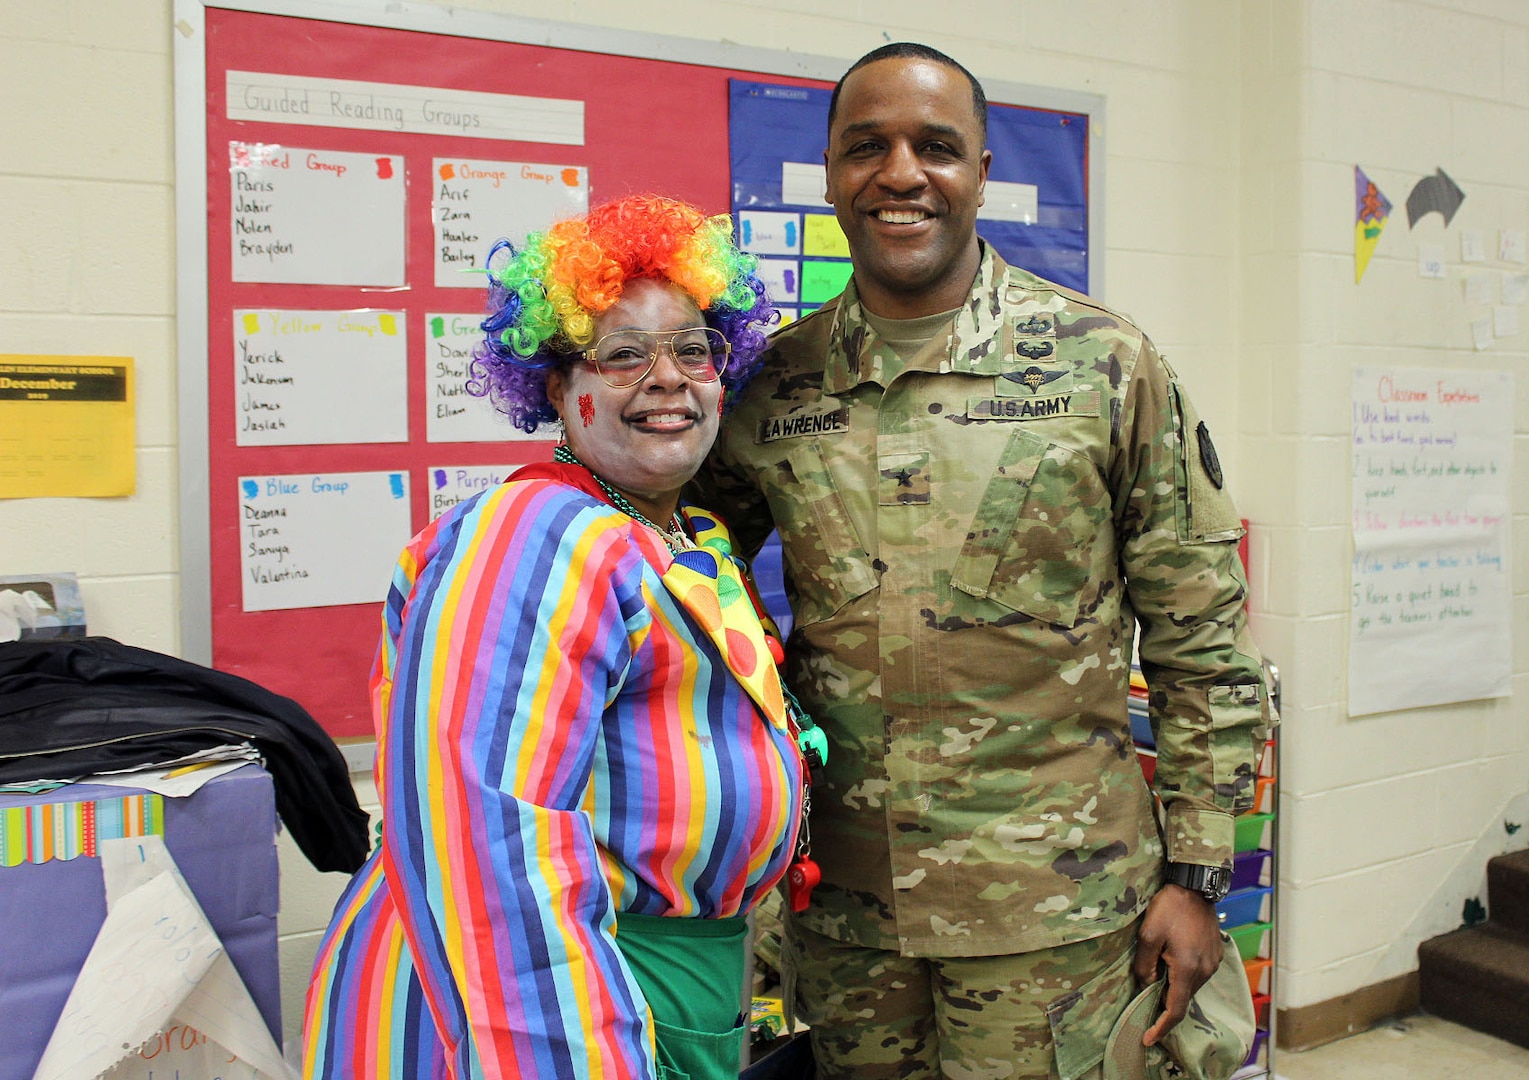 Crystal Robinson, a DLA Troop Support volunteer, left, and Army Brig. Gen. Gavin Lawrence, DLA Troop Support commander, right, pose for a photo during the Children’s Holiday Party Dec. 12, 2019 in Philadelphia.